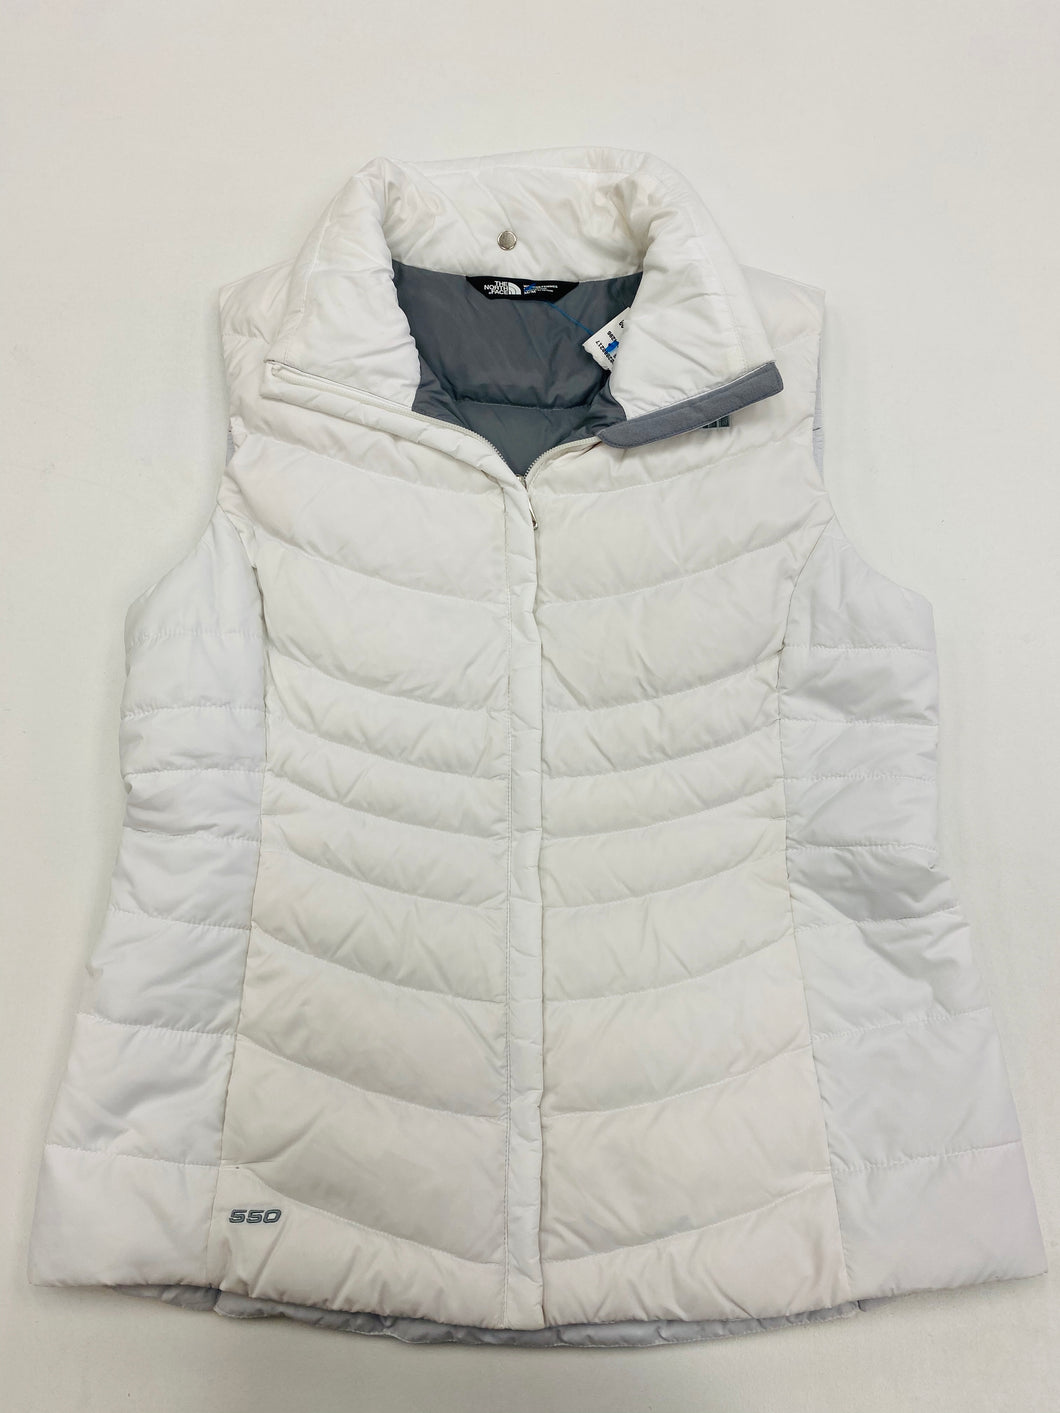 North Face Womens Outerwear Size Medium